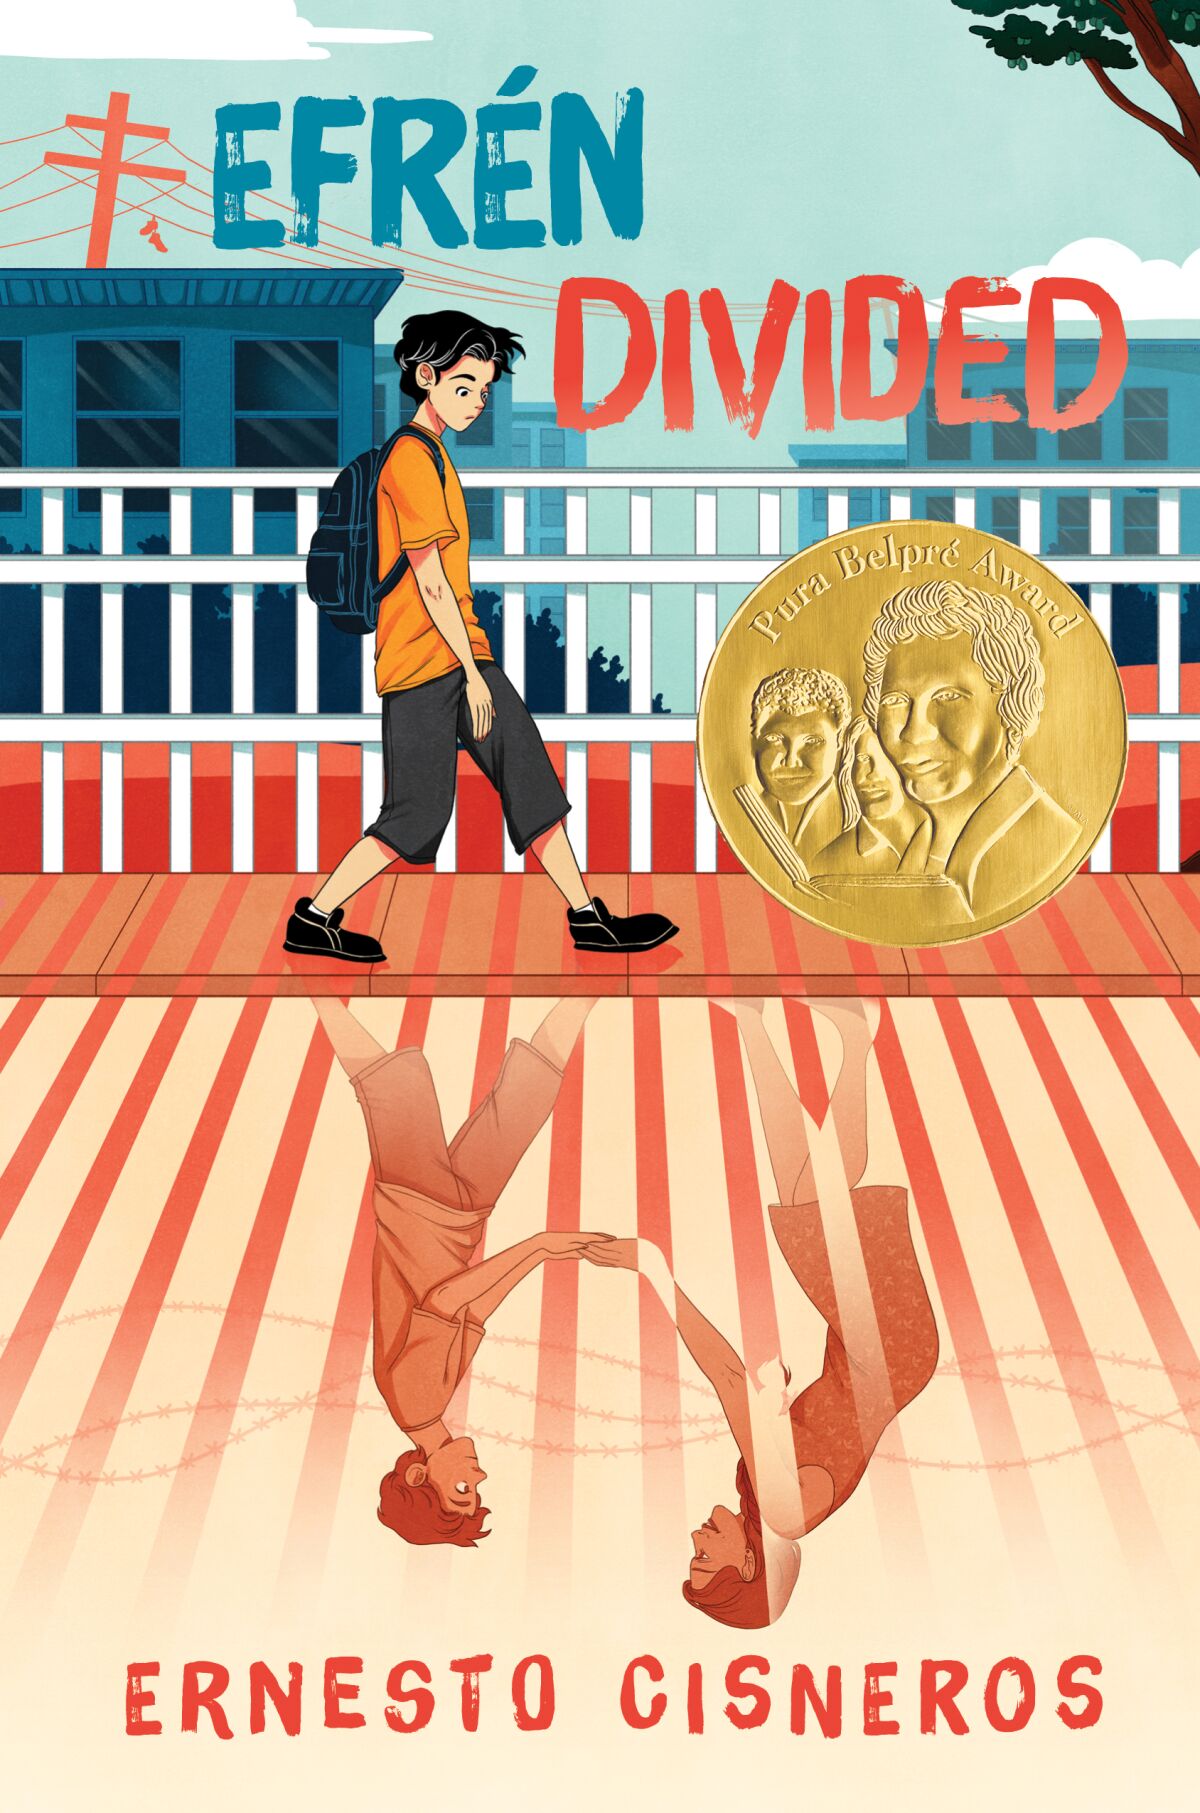 “Efrén Divided” is about a 12-year-old boy whose world changes when his mother is deported to Mexico.